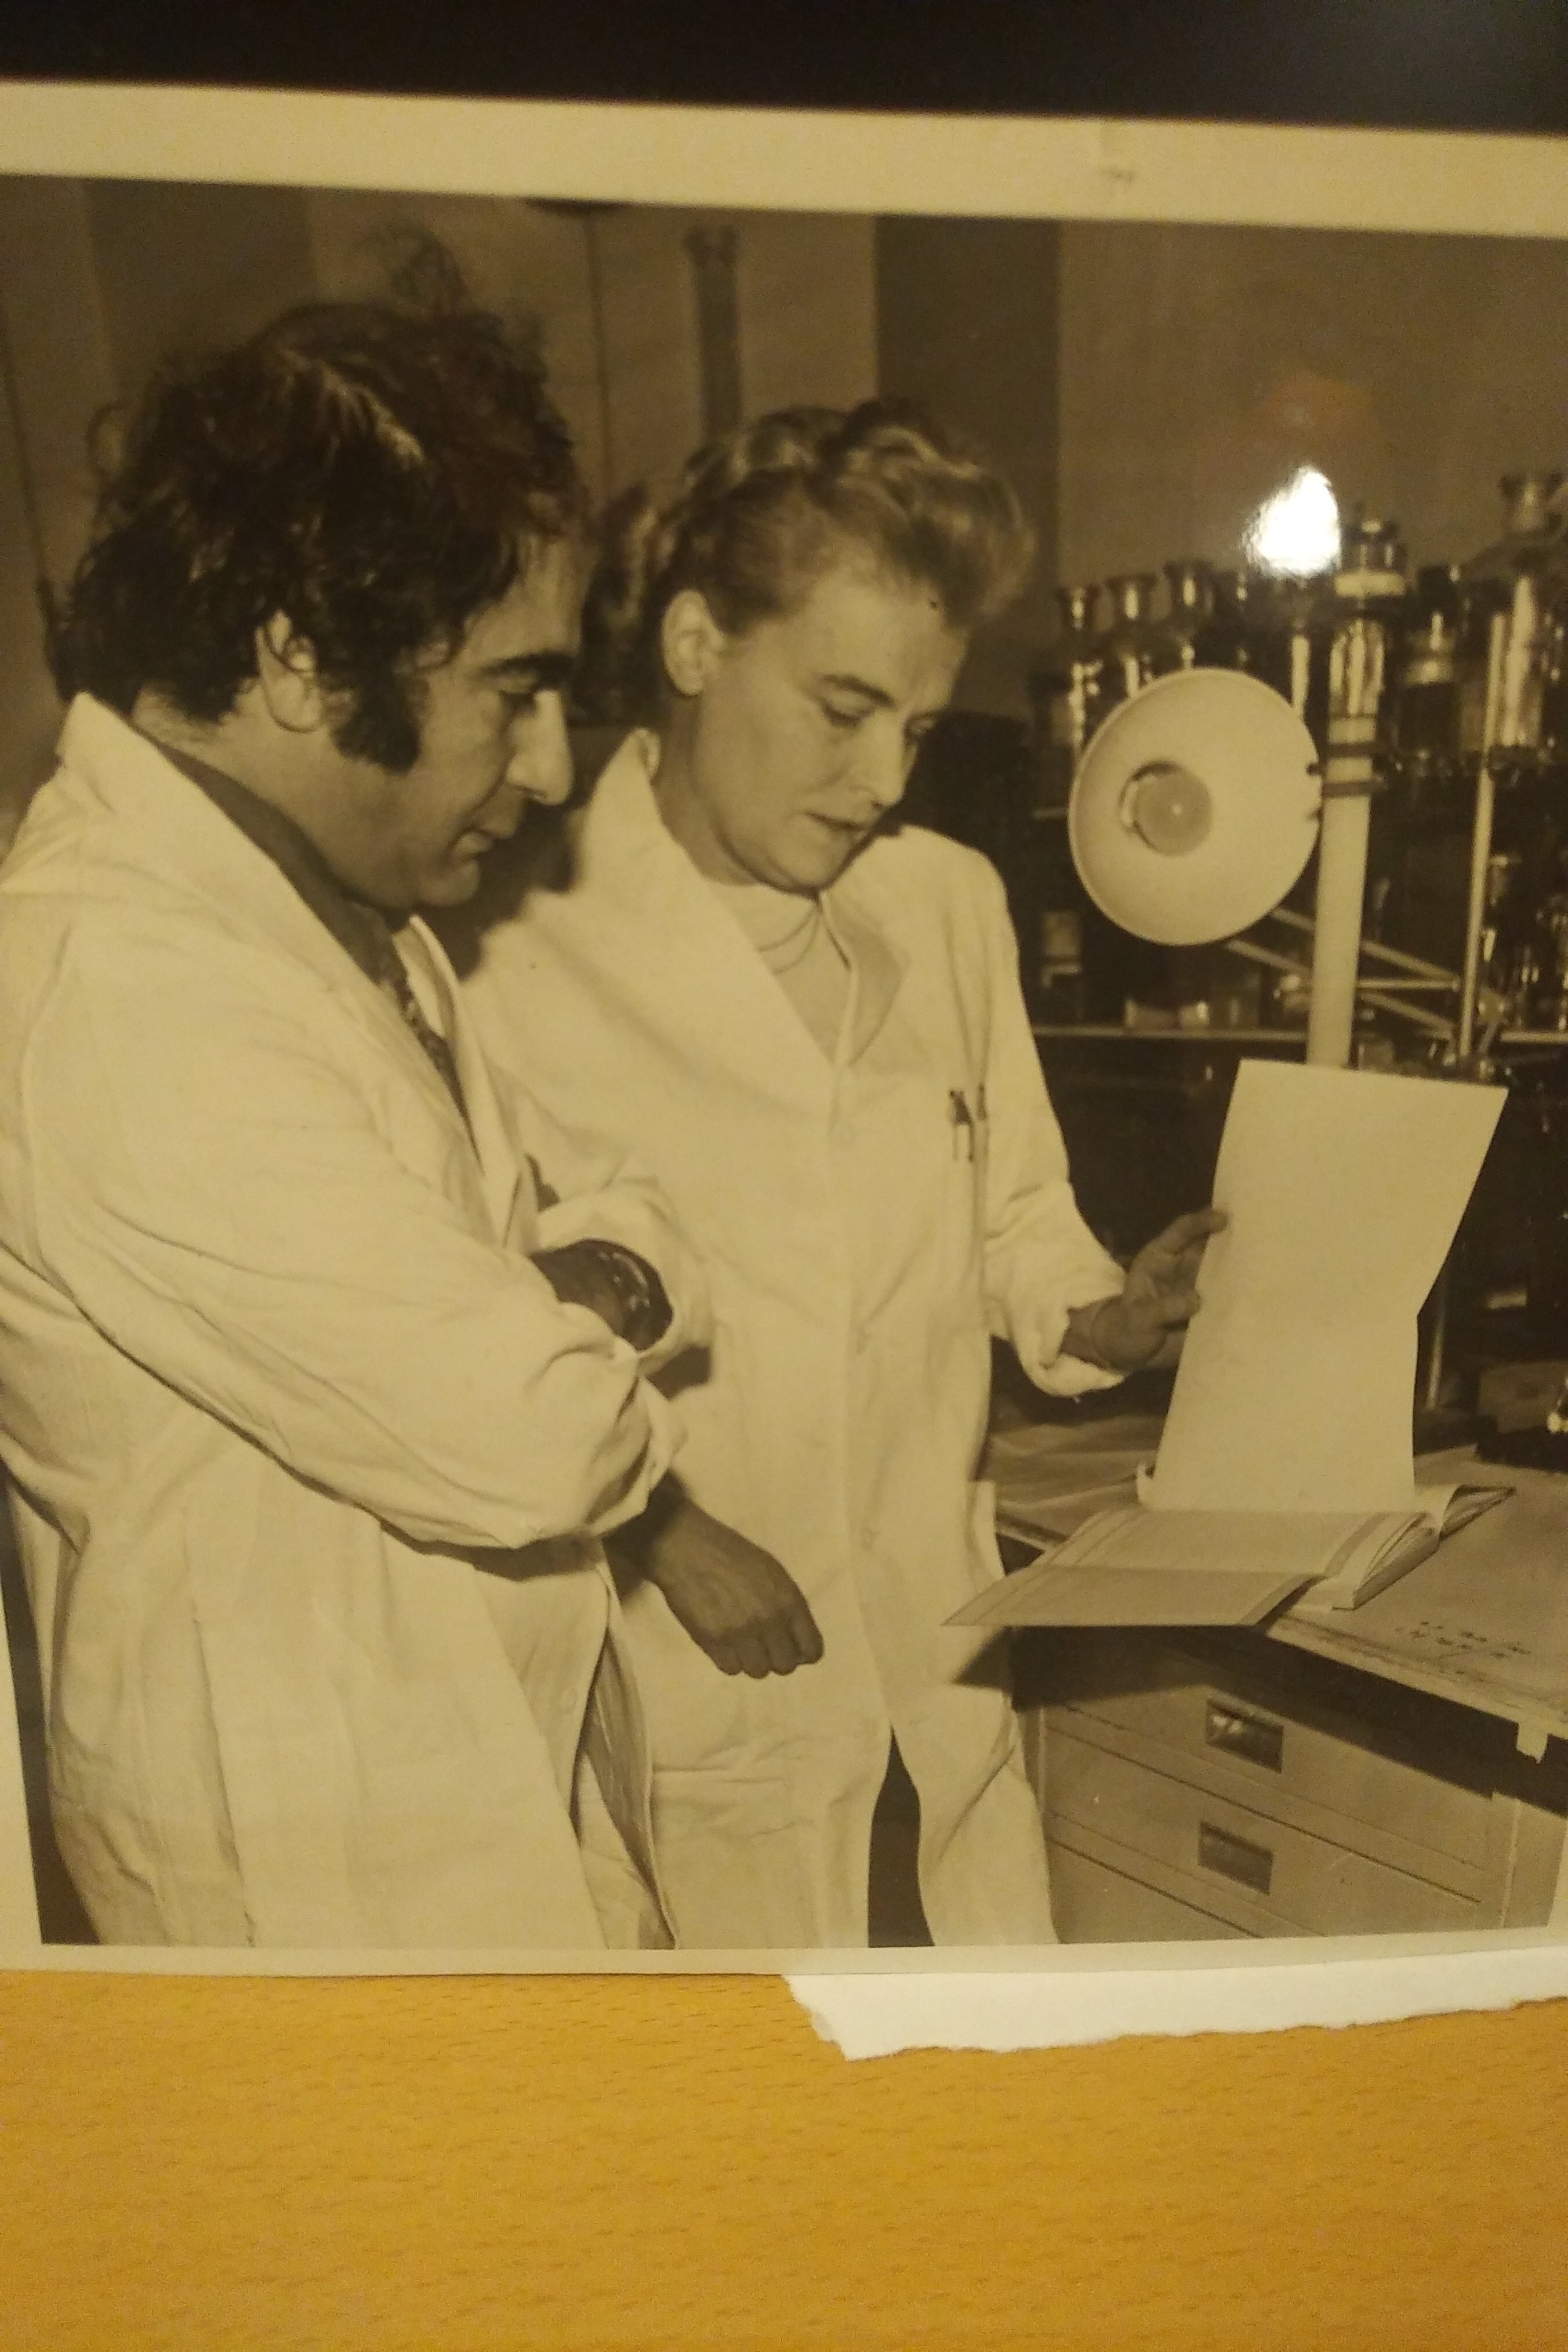 Professor Gregory Gregoriadis with Dr Brenda Ryman in their laboratory at the Royal Free Hospital School of Medicine in 1971, the year they published their research about the use of liposomes as drug carriers